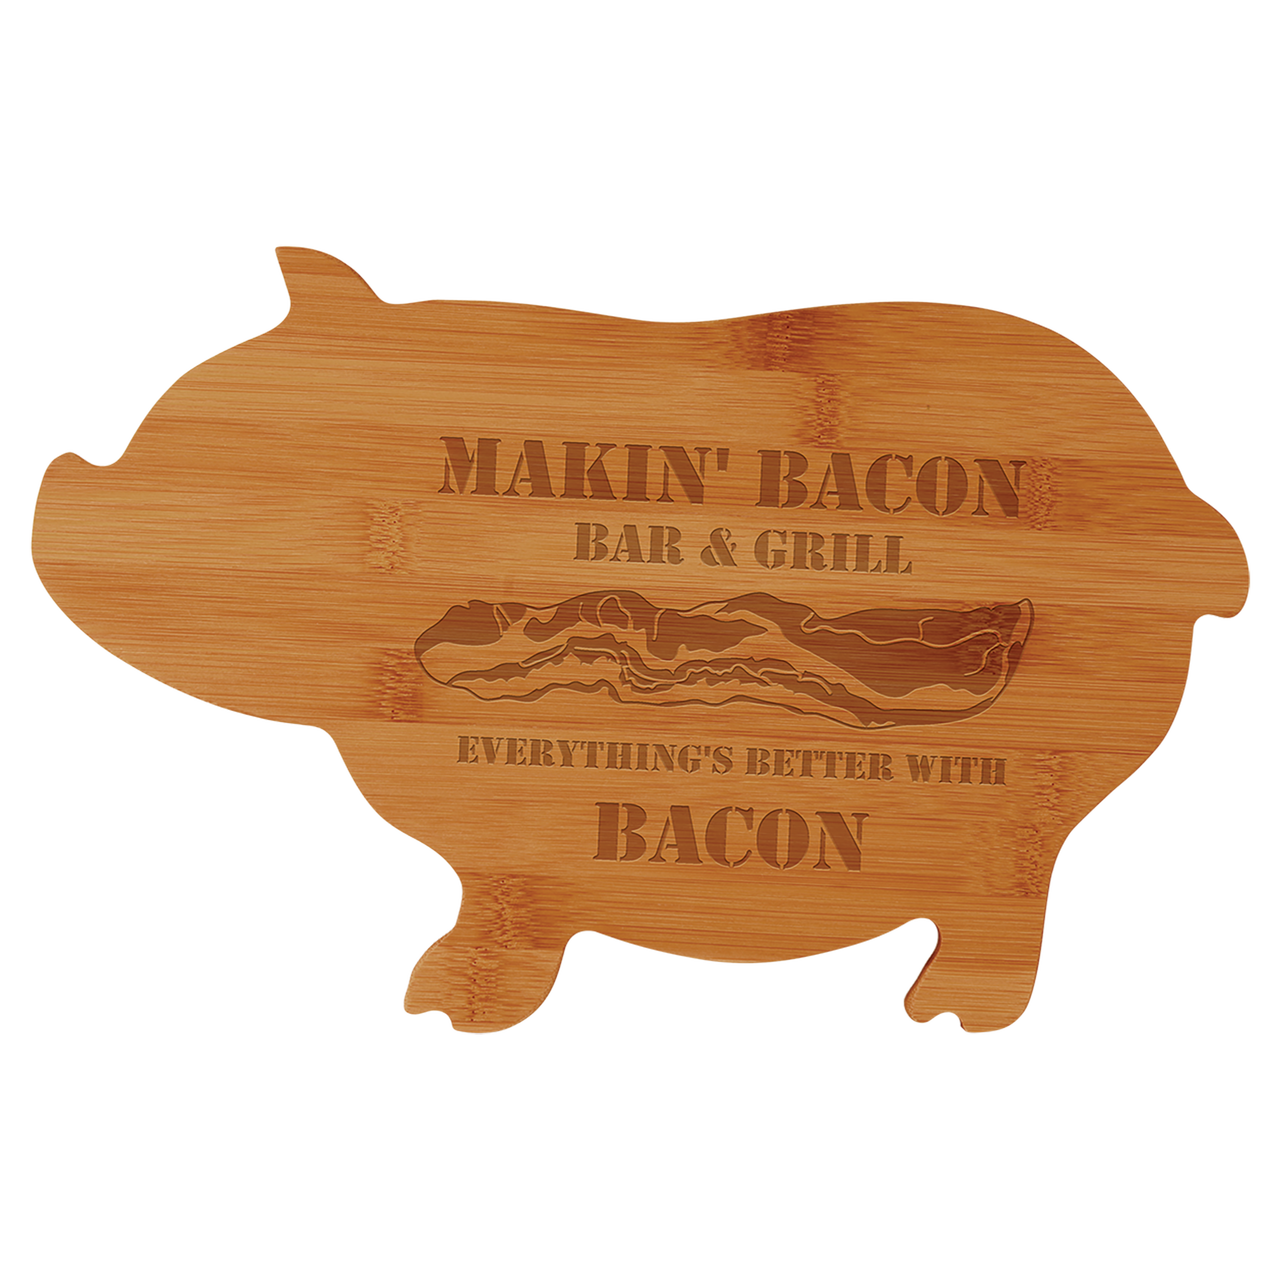 Engraved Bamboo Cutting Board Using Handwritten Recipe – The Cracked Pig